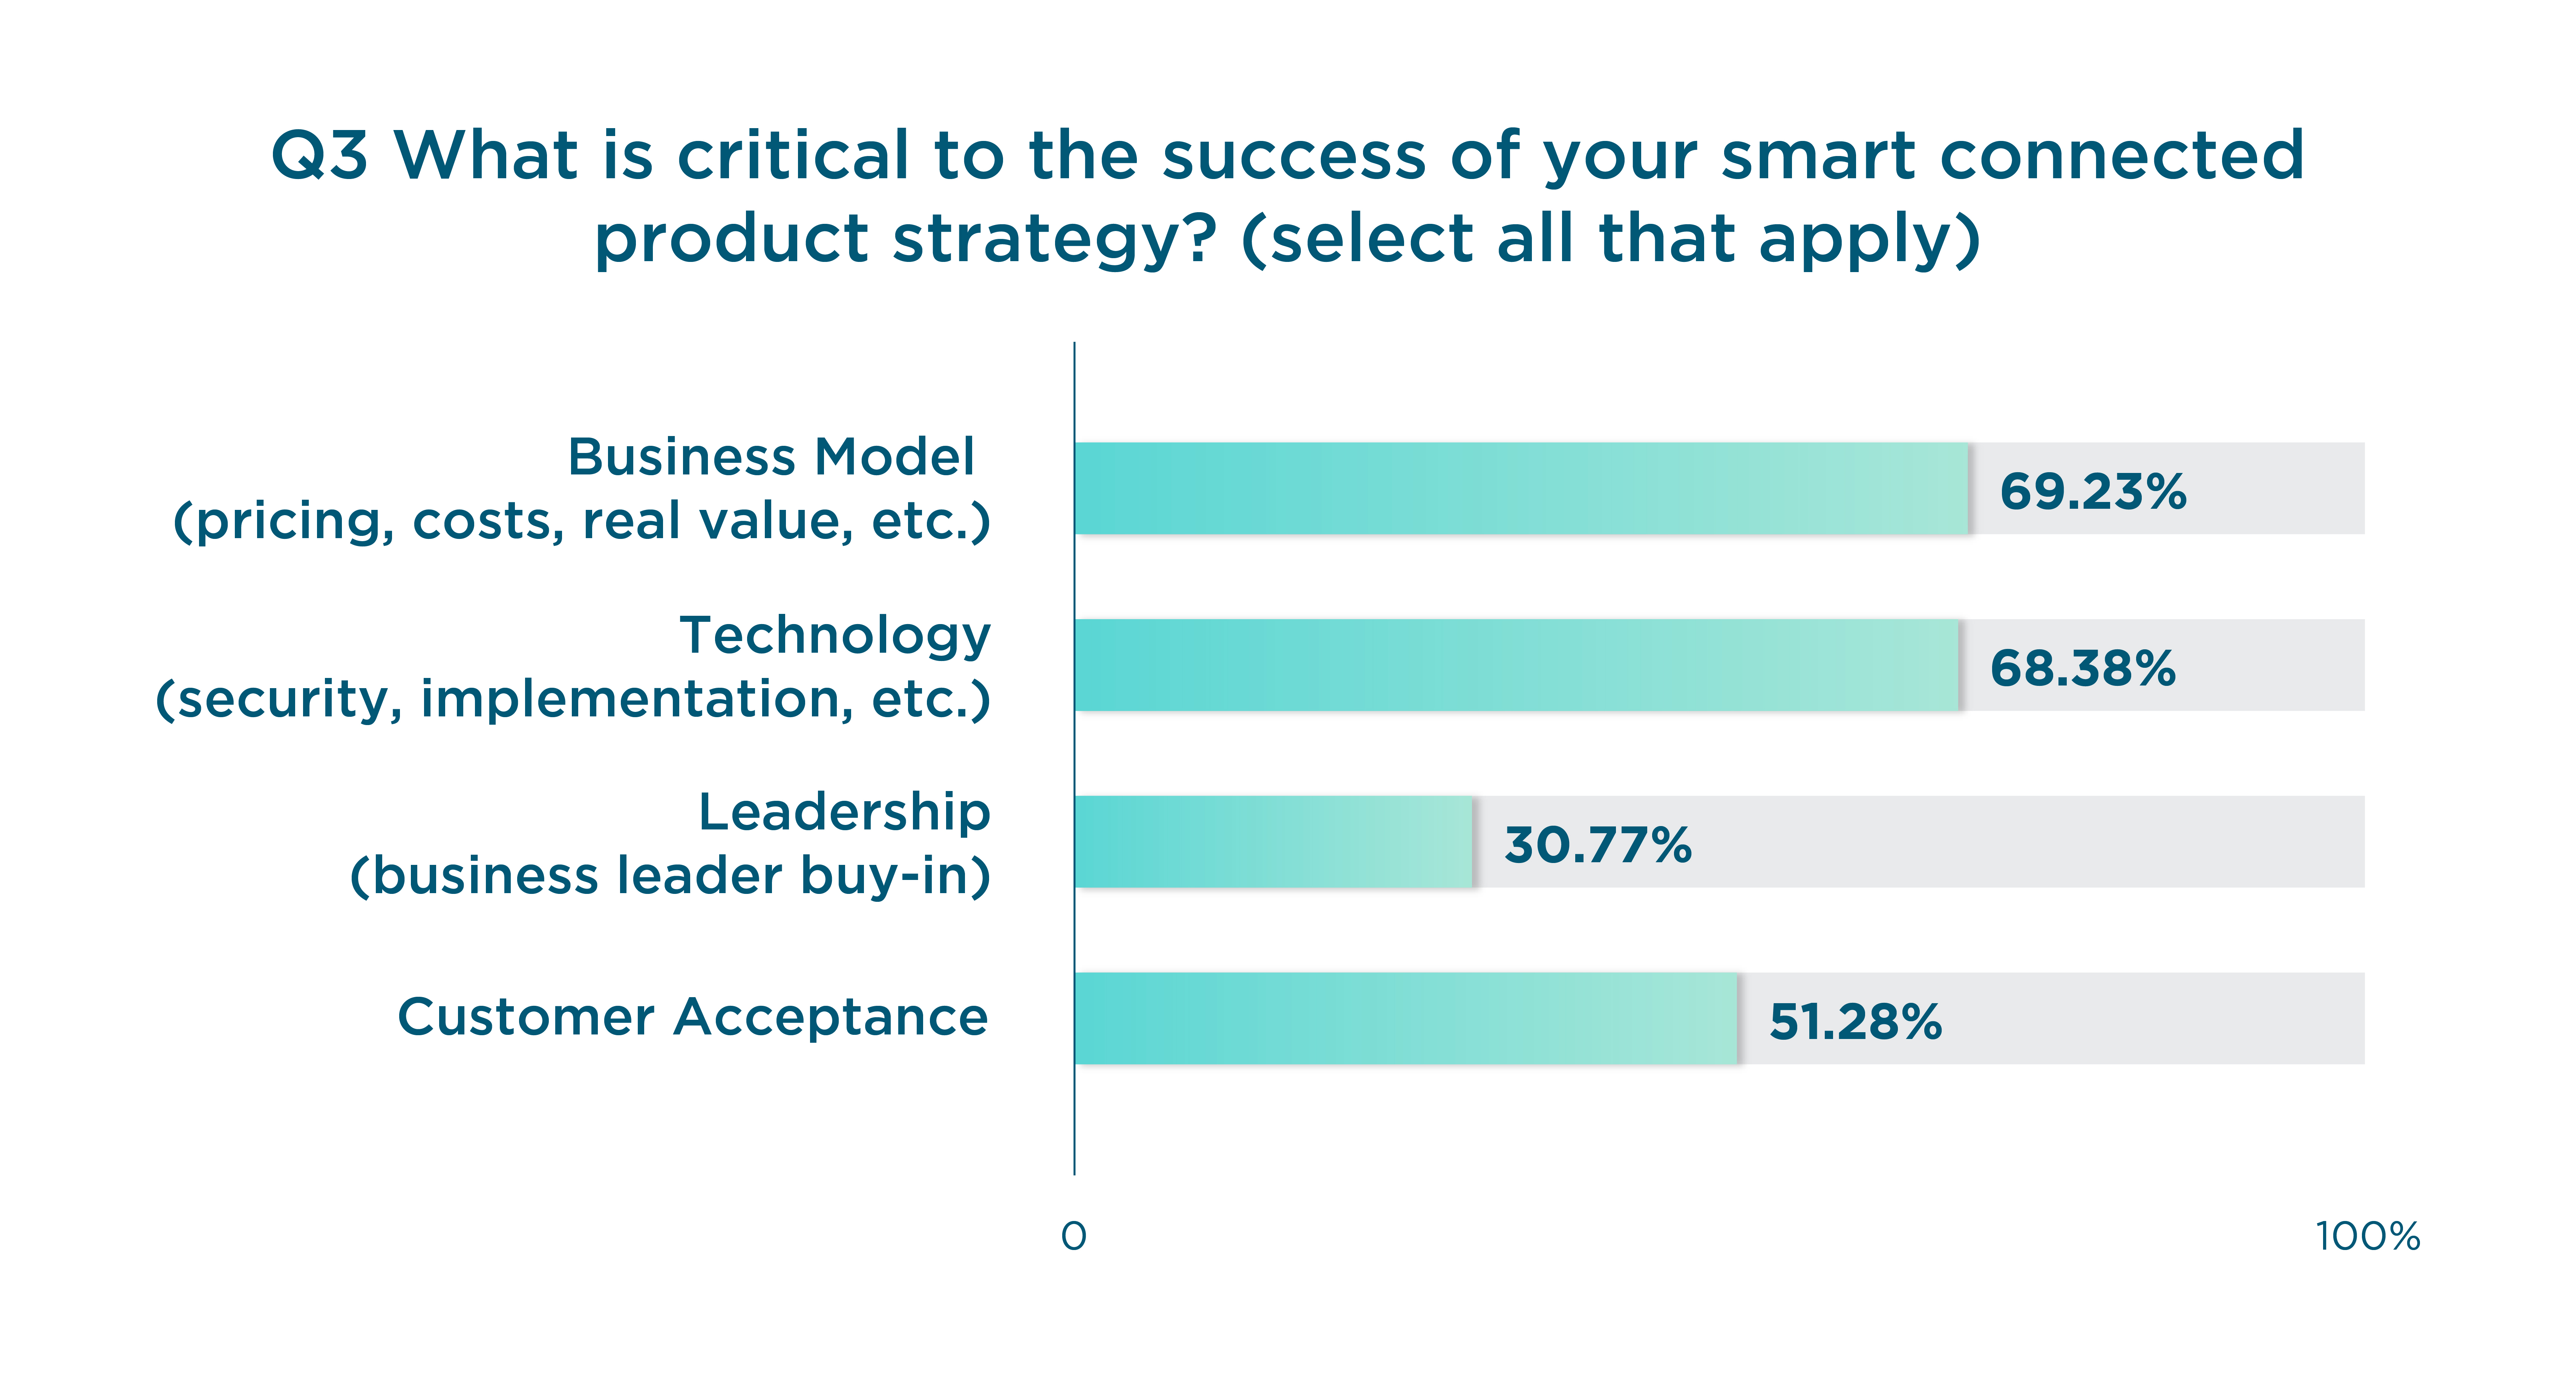 Factors respondents deemed critical to their smart connected product strategy